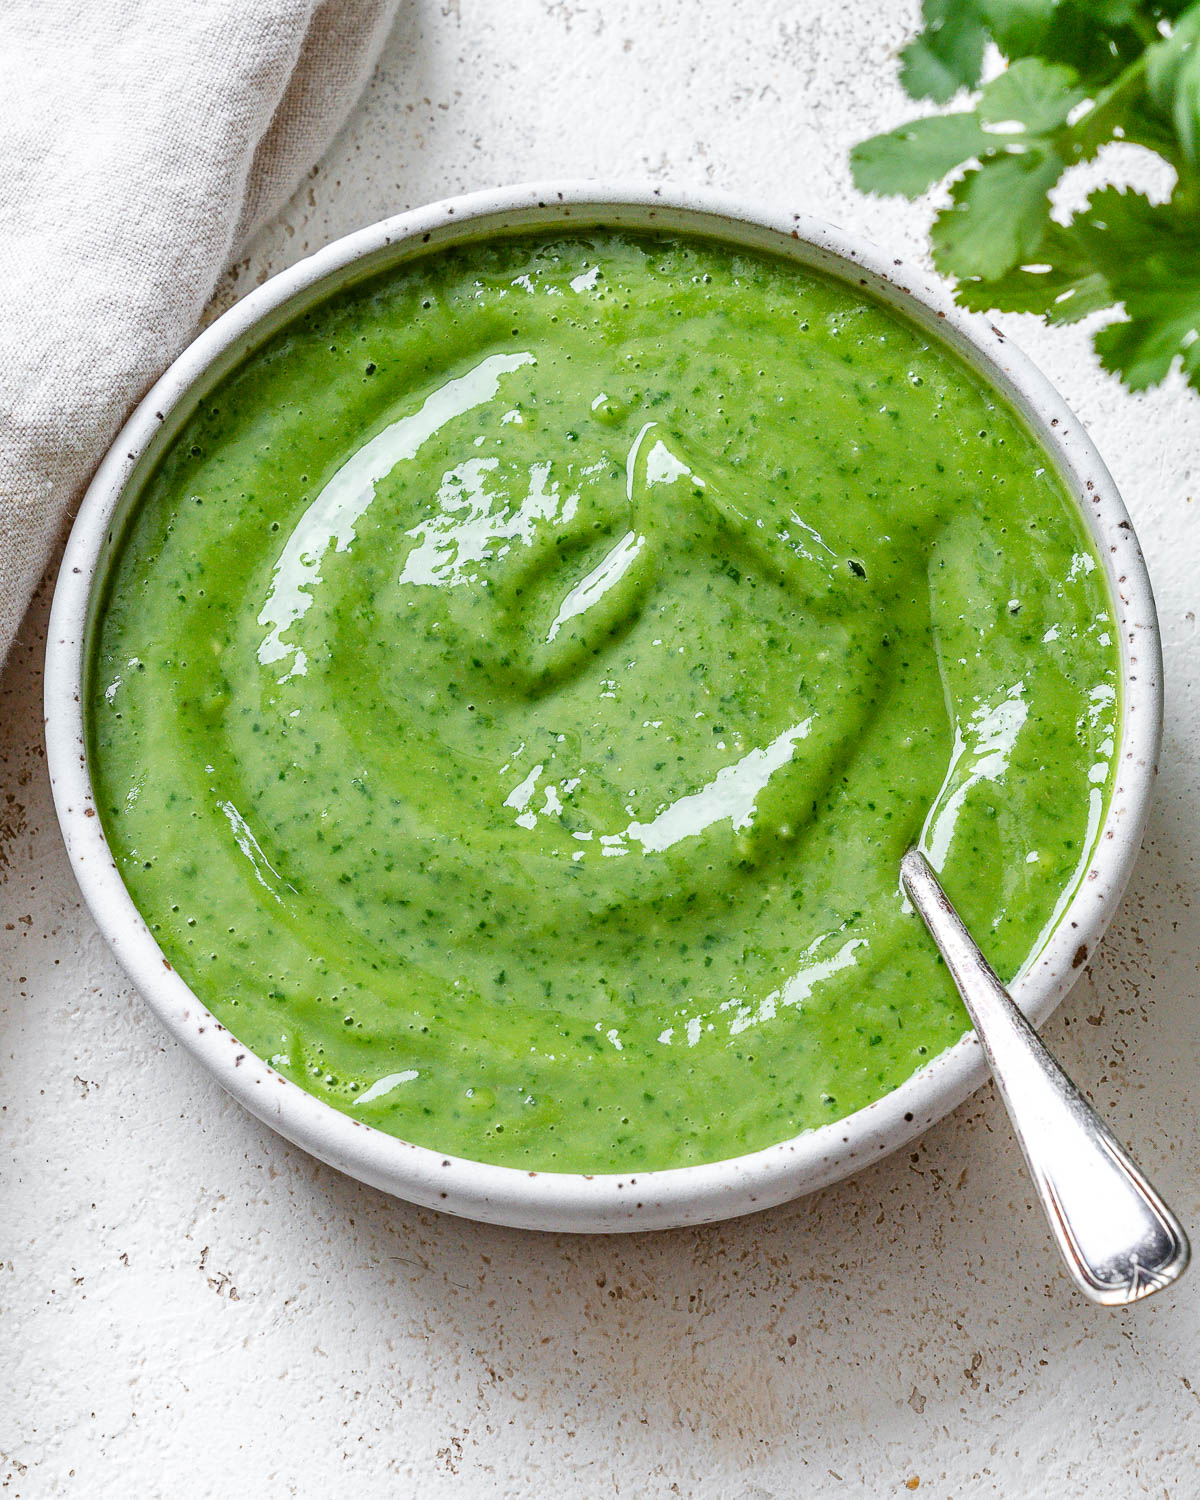 completed Avocado Green Goddess Dressing in a bowl against a light surface